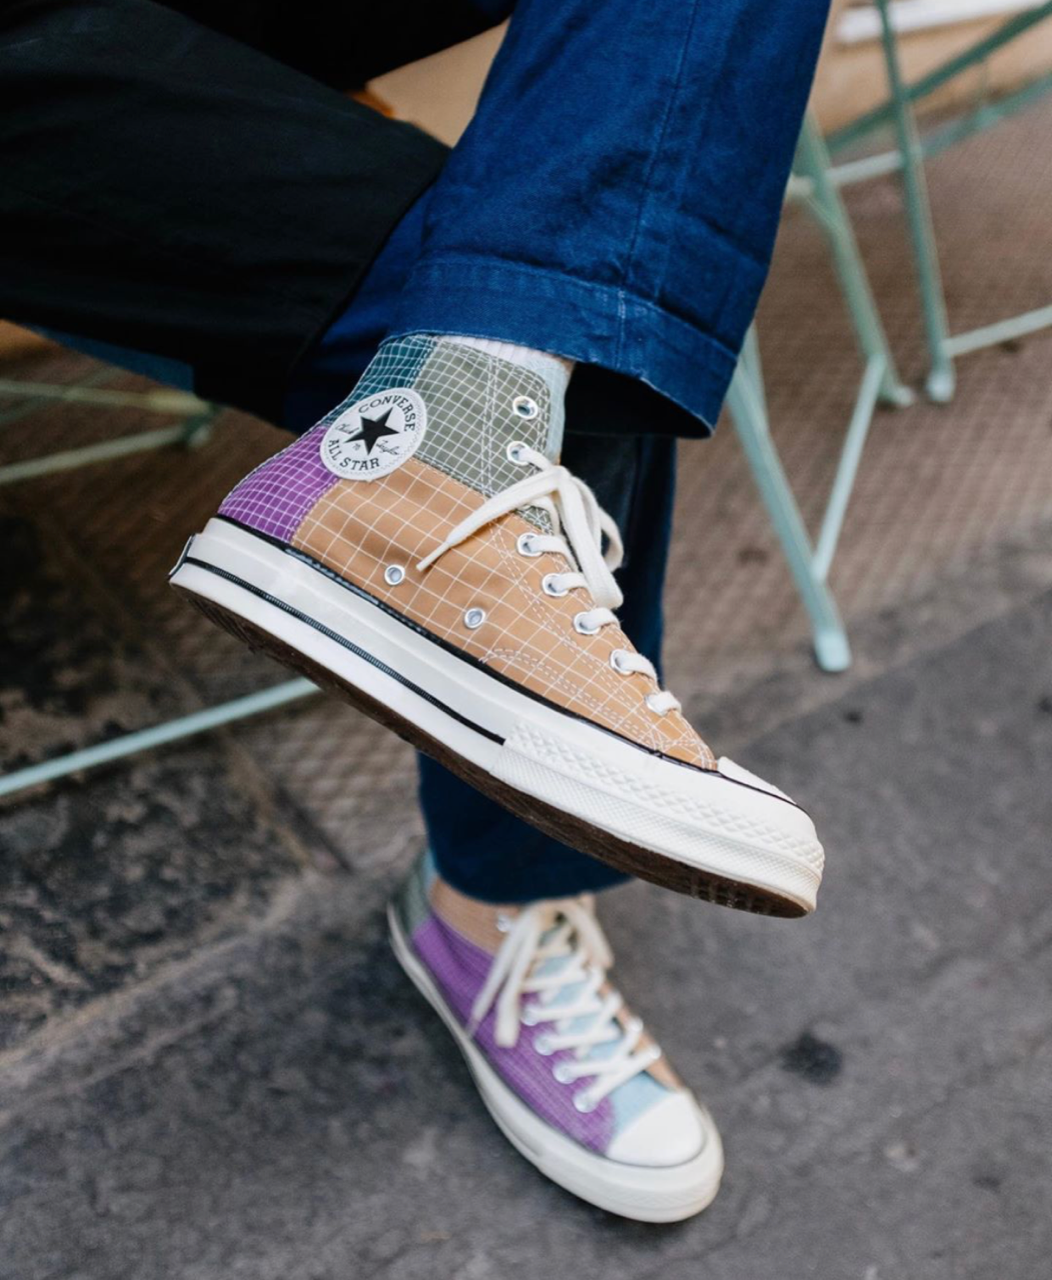 Cop Can: The Latest Chuck Hi CNK Daily (ChicksNKicks)